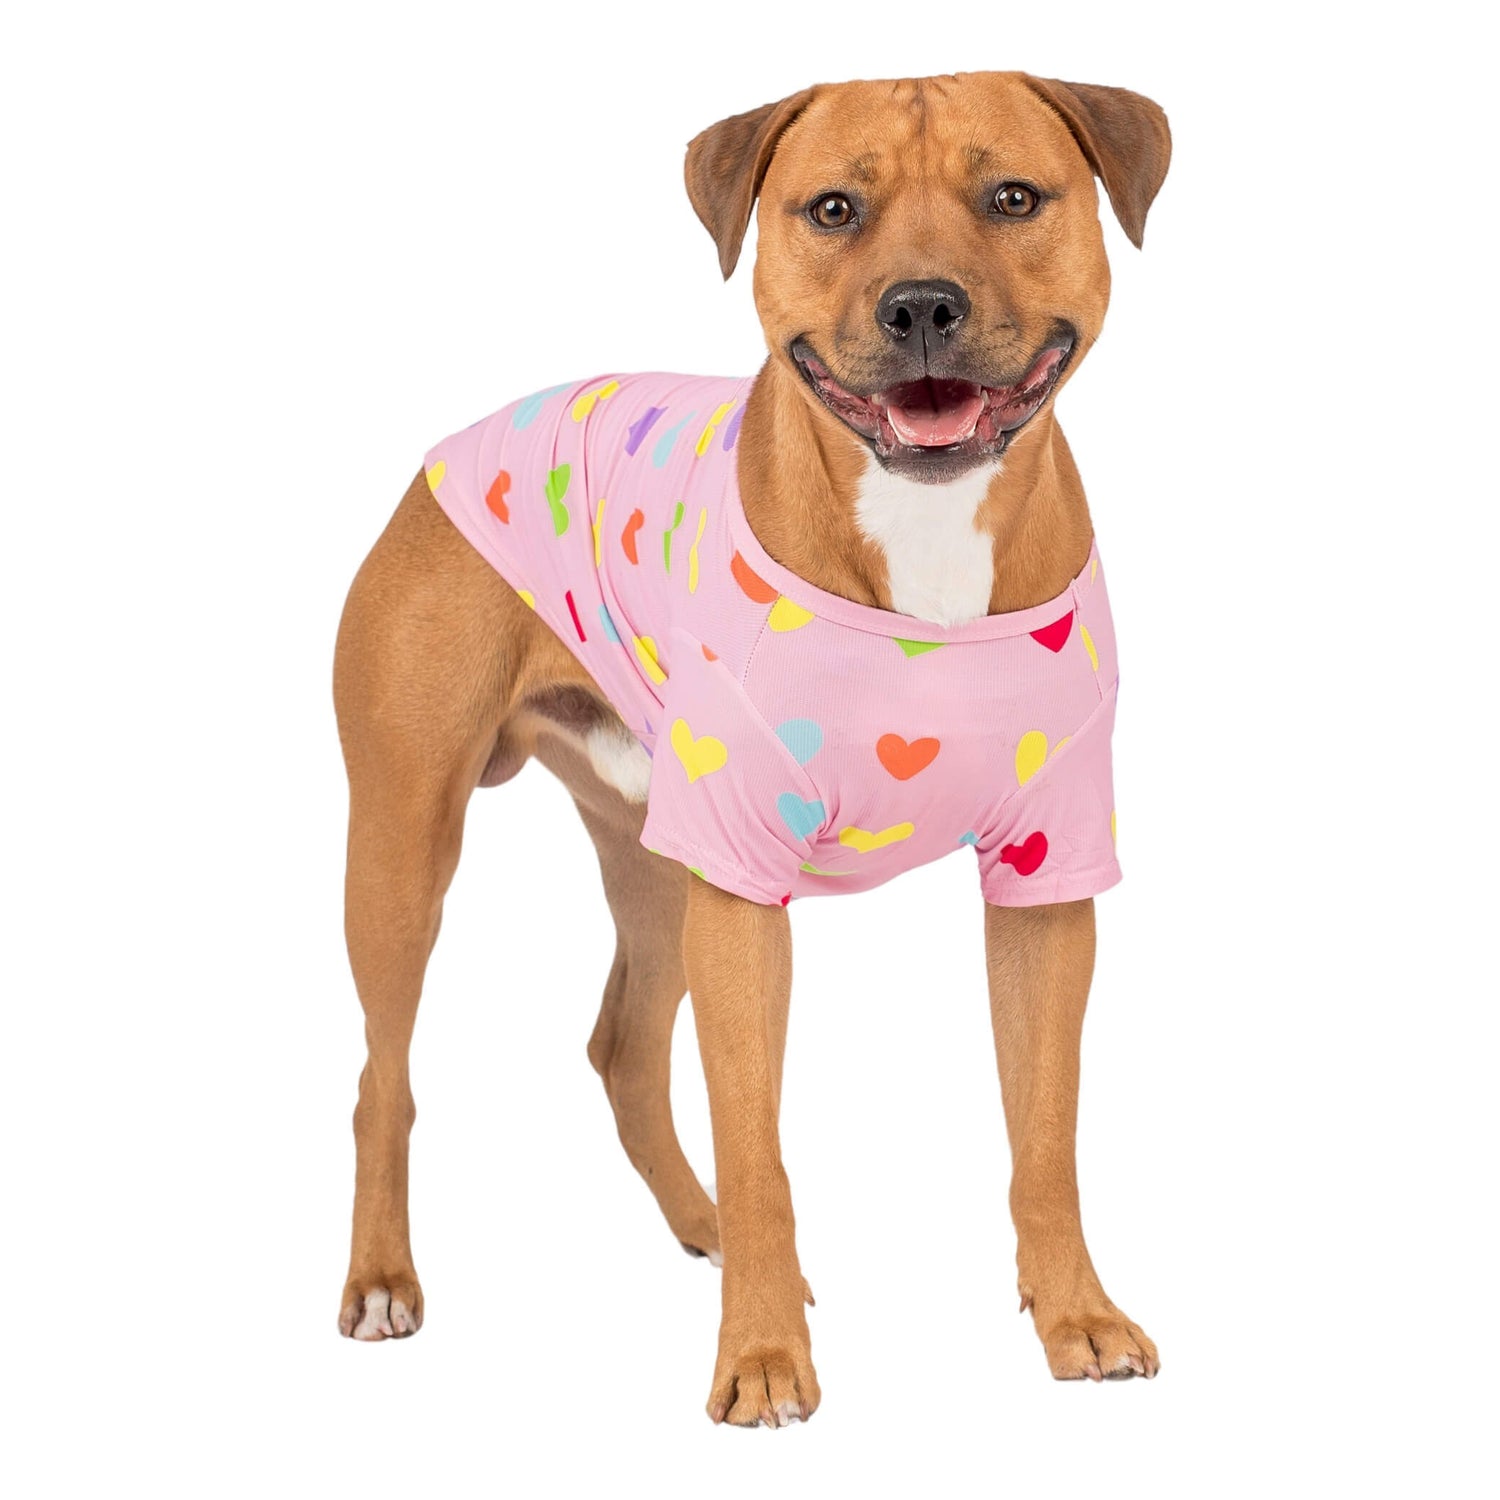 A Staffy standing looking forwards wearing a pink shirt with orange, blue, yellow, and green love hearts printed on it.  This shirt for dogs is designed to be wet to cool dogs down.